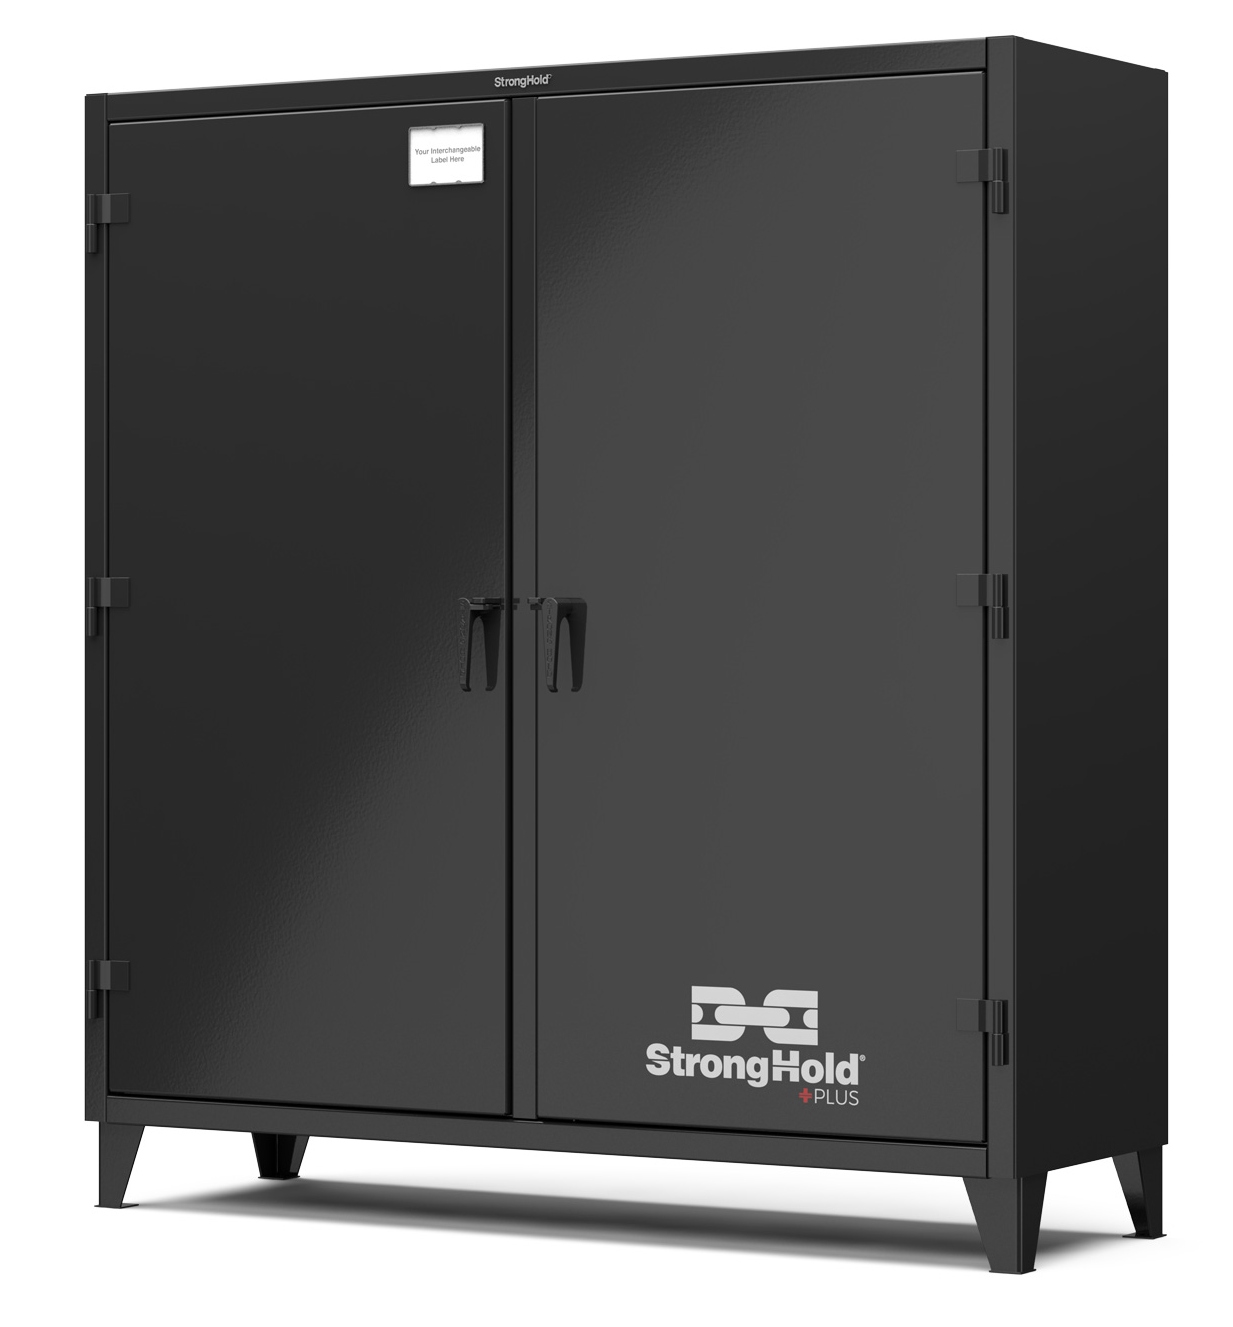 Strong Hold Plus Single Shift Industrial Storage Cabinet